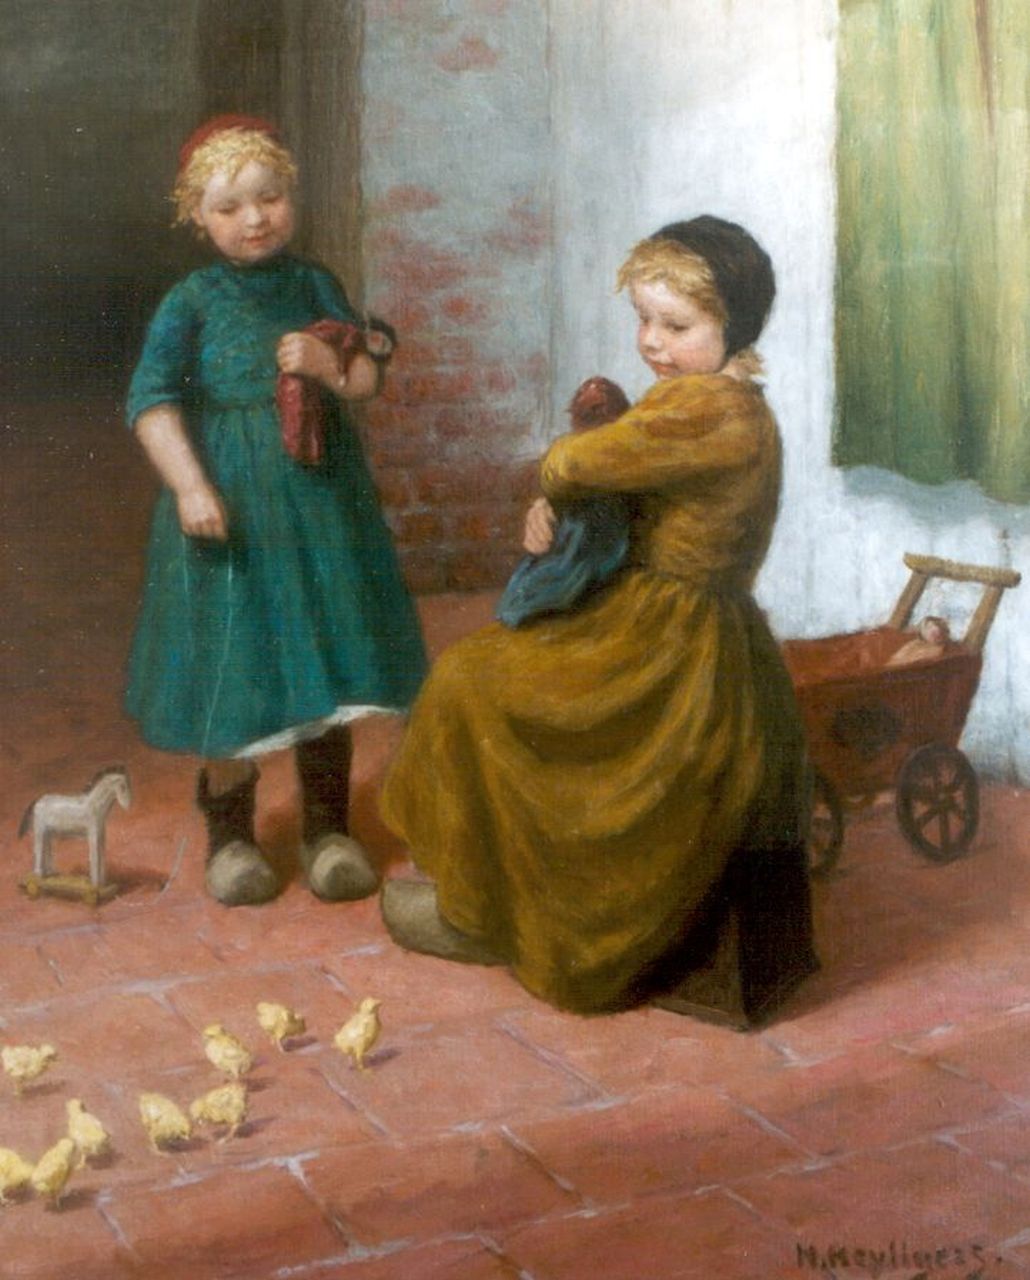 Heijligers H.  | Hendrik 'Henri' Heijligers, Children playing with chicks, oil on canvas 73.5 x 59.4 cm, signed l.r.